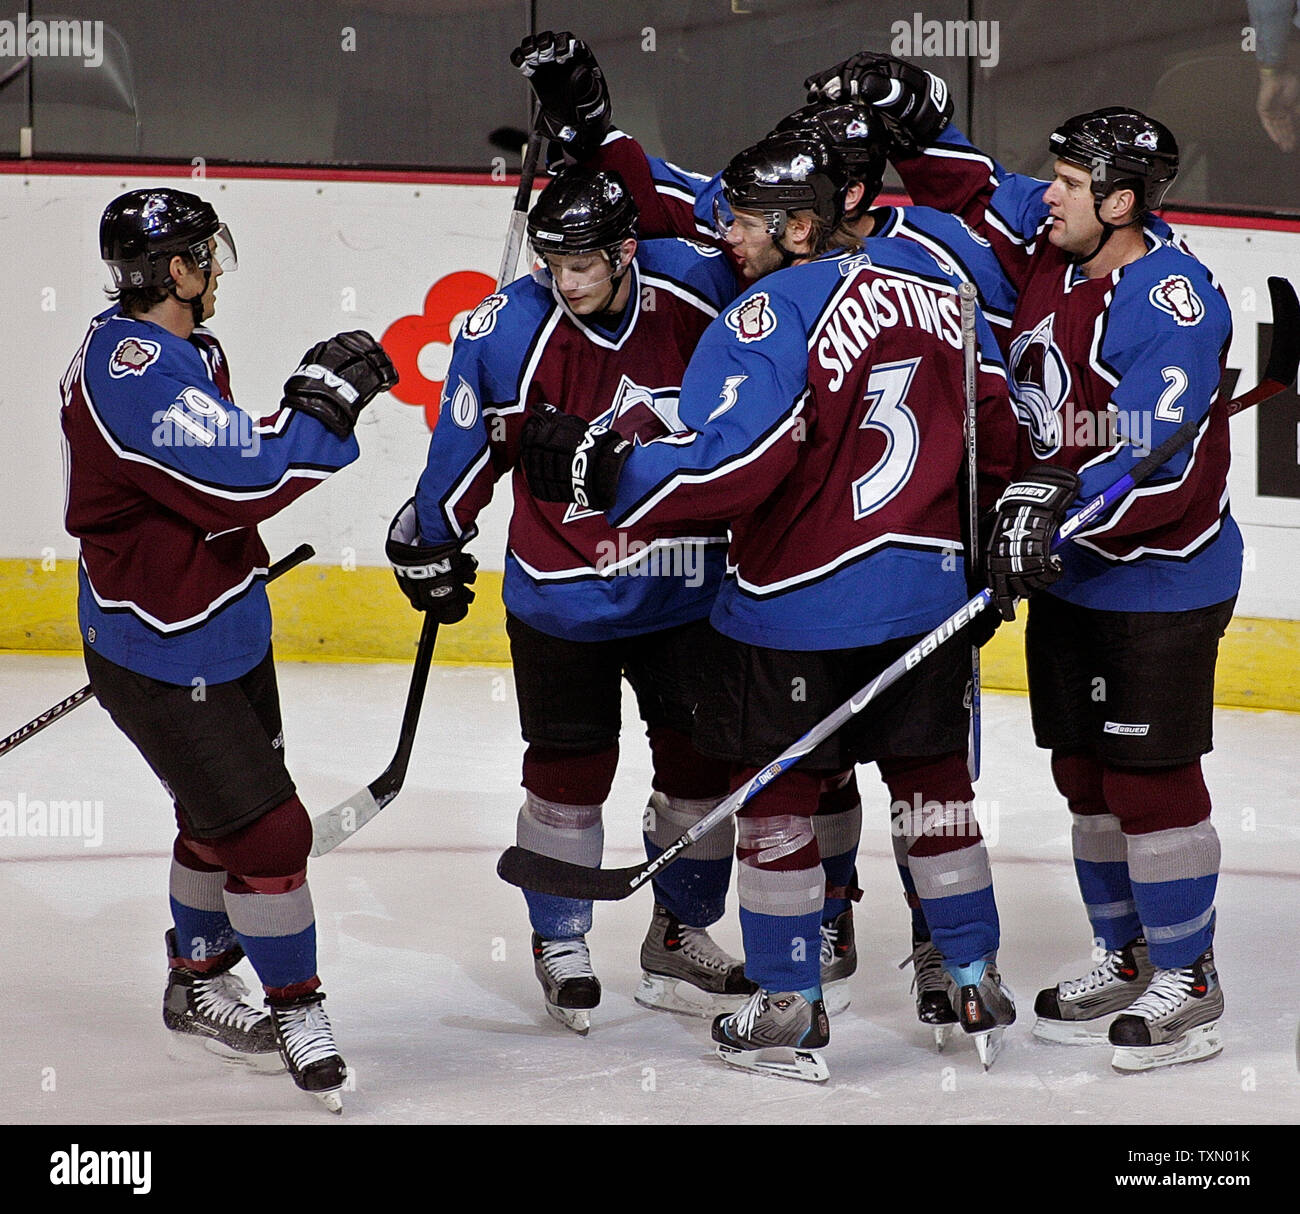 Colorado Avalanche center Joe Sakic (L) receives congratulations from his teammates after scoring his 1500th career point, earning an assist on teammate Andrew Brunette's goal against the Washington Capitals, at the Pepsi Center in Denver October 25, 2006.  Avalanche Marek Svatos (second from left) of Slovakia, Karlis Skrastins (second from right) of Latvia, and Ken Klee (R) help congratulate Sakic.   (UPI Photo/Gary C. Caskey) Stock Photo